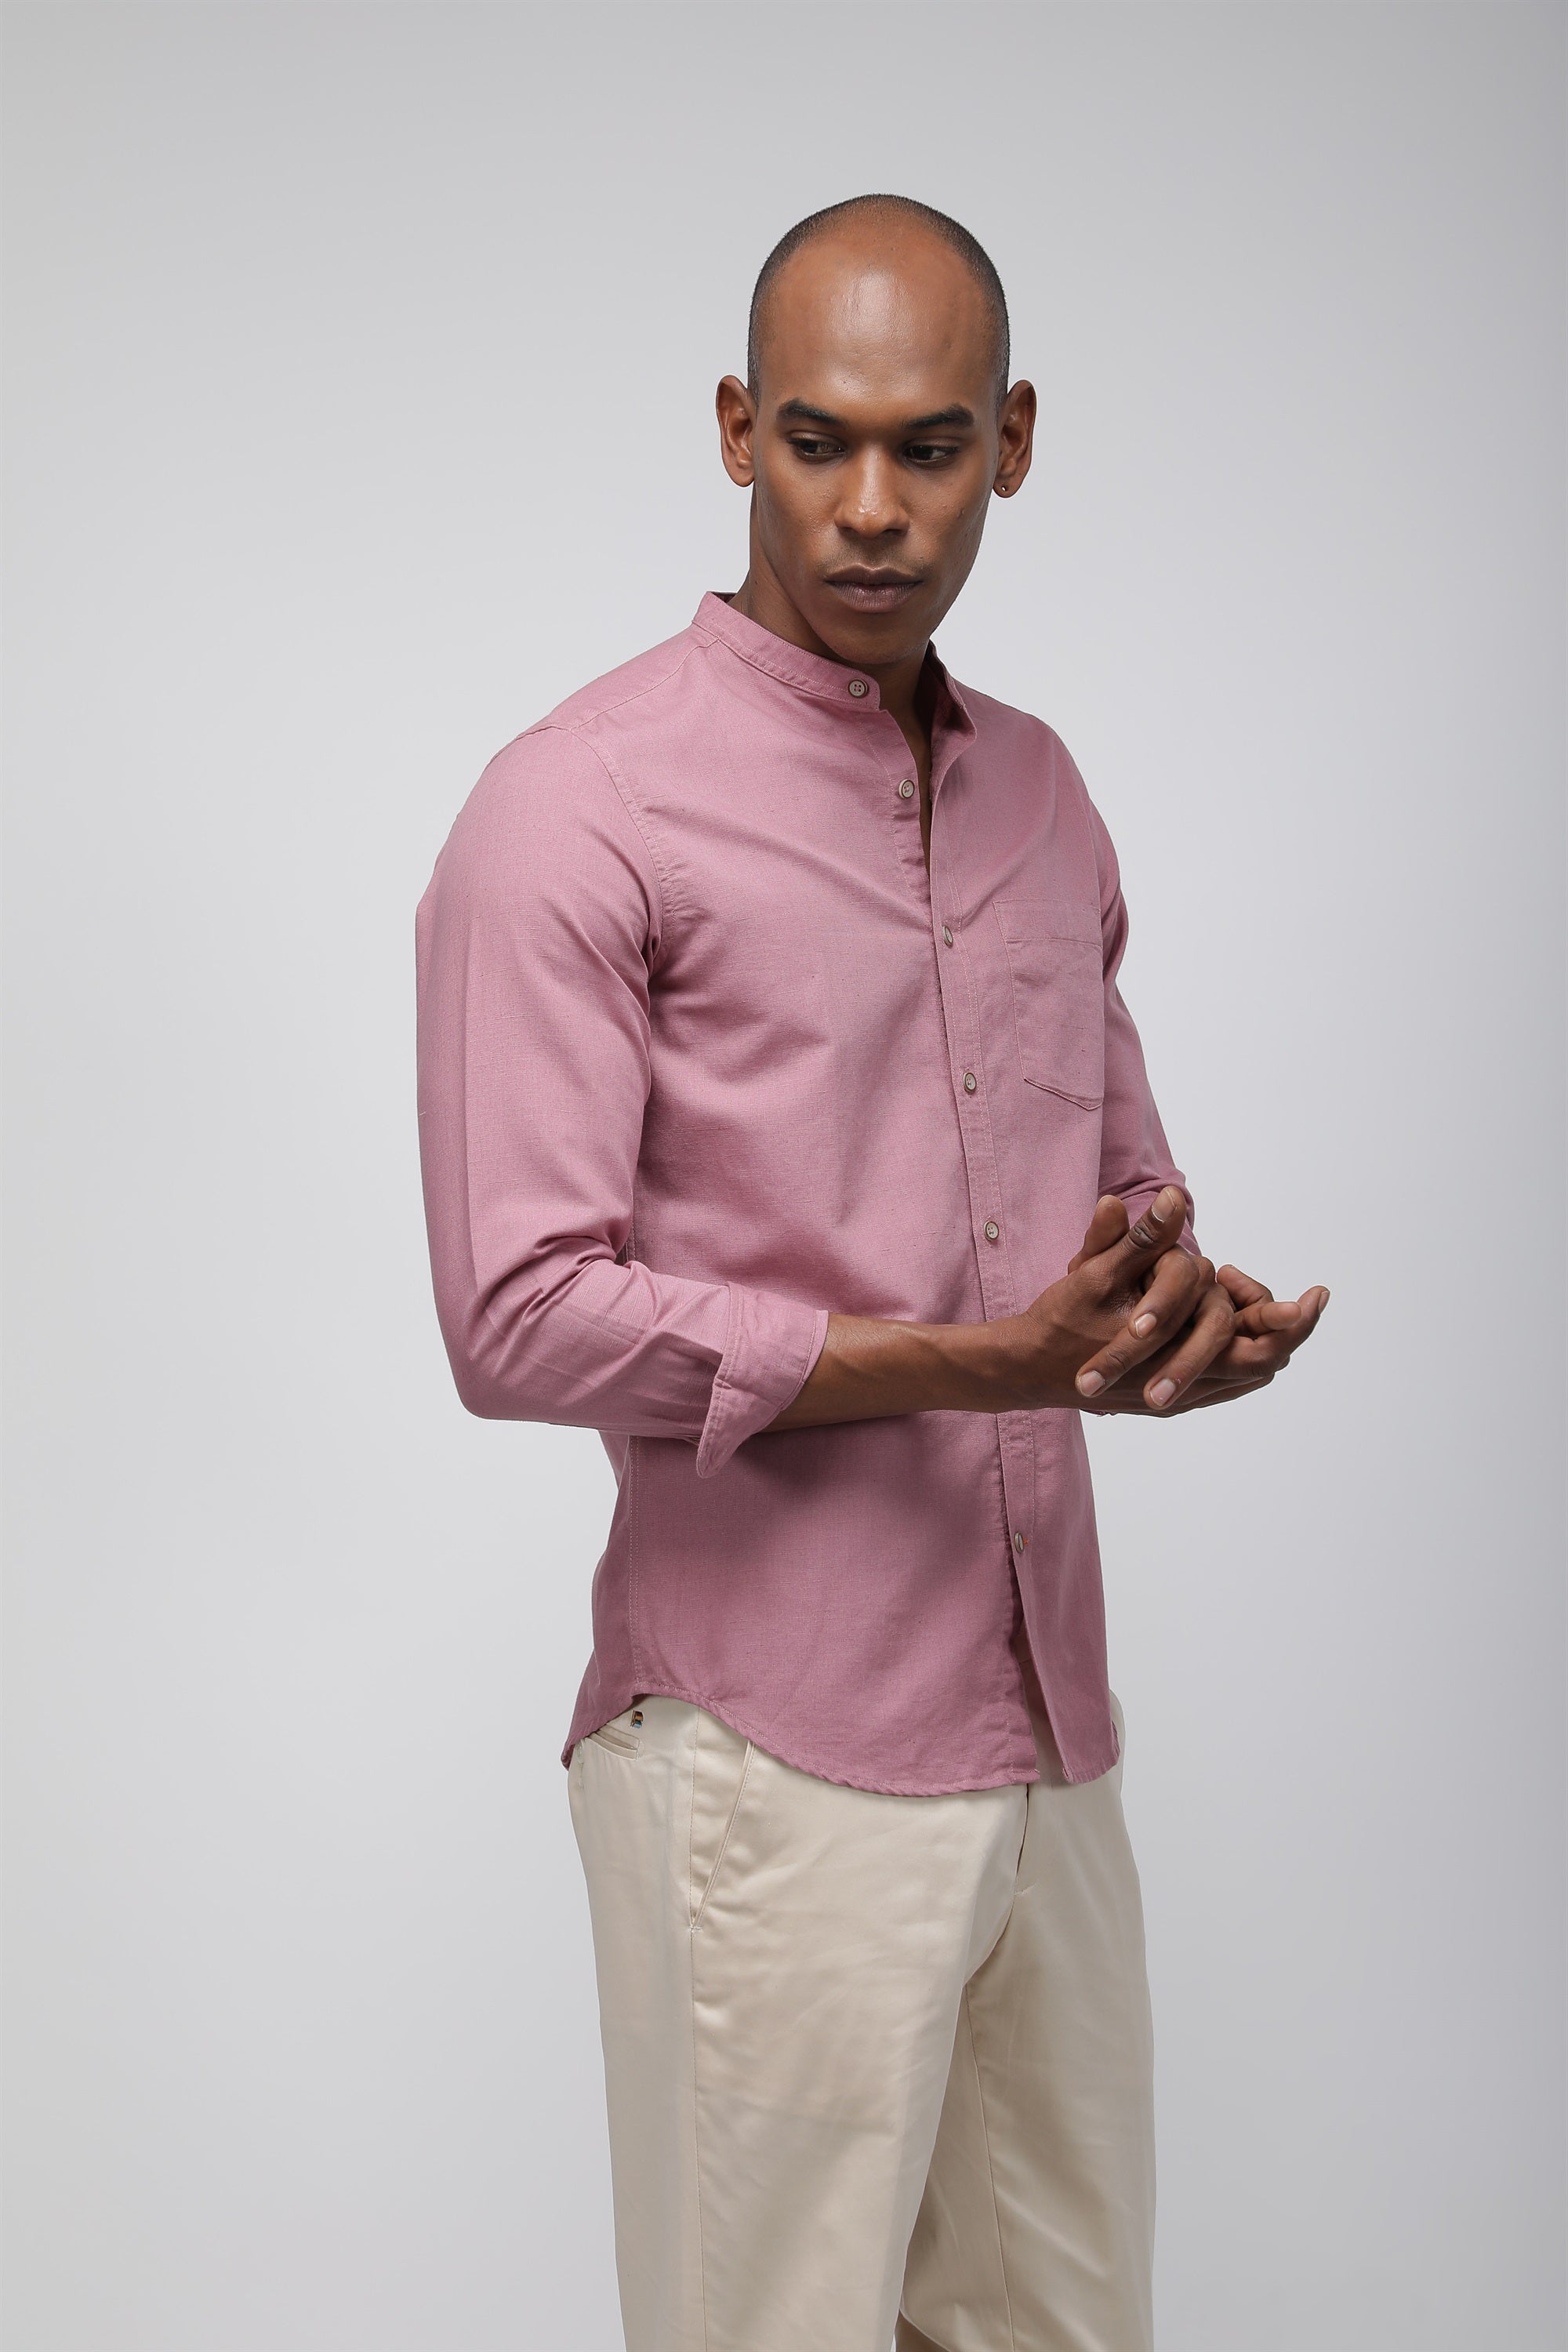 Bare Brown Mandarin Collar Cotton Linen Shirt, Slim Fit with Full Sleeves - Mauve